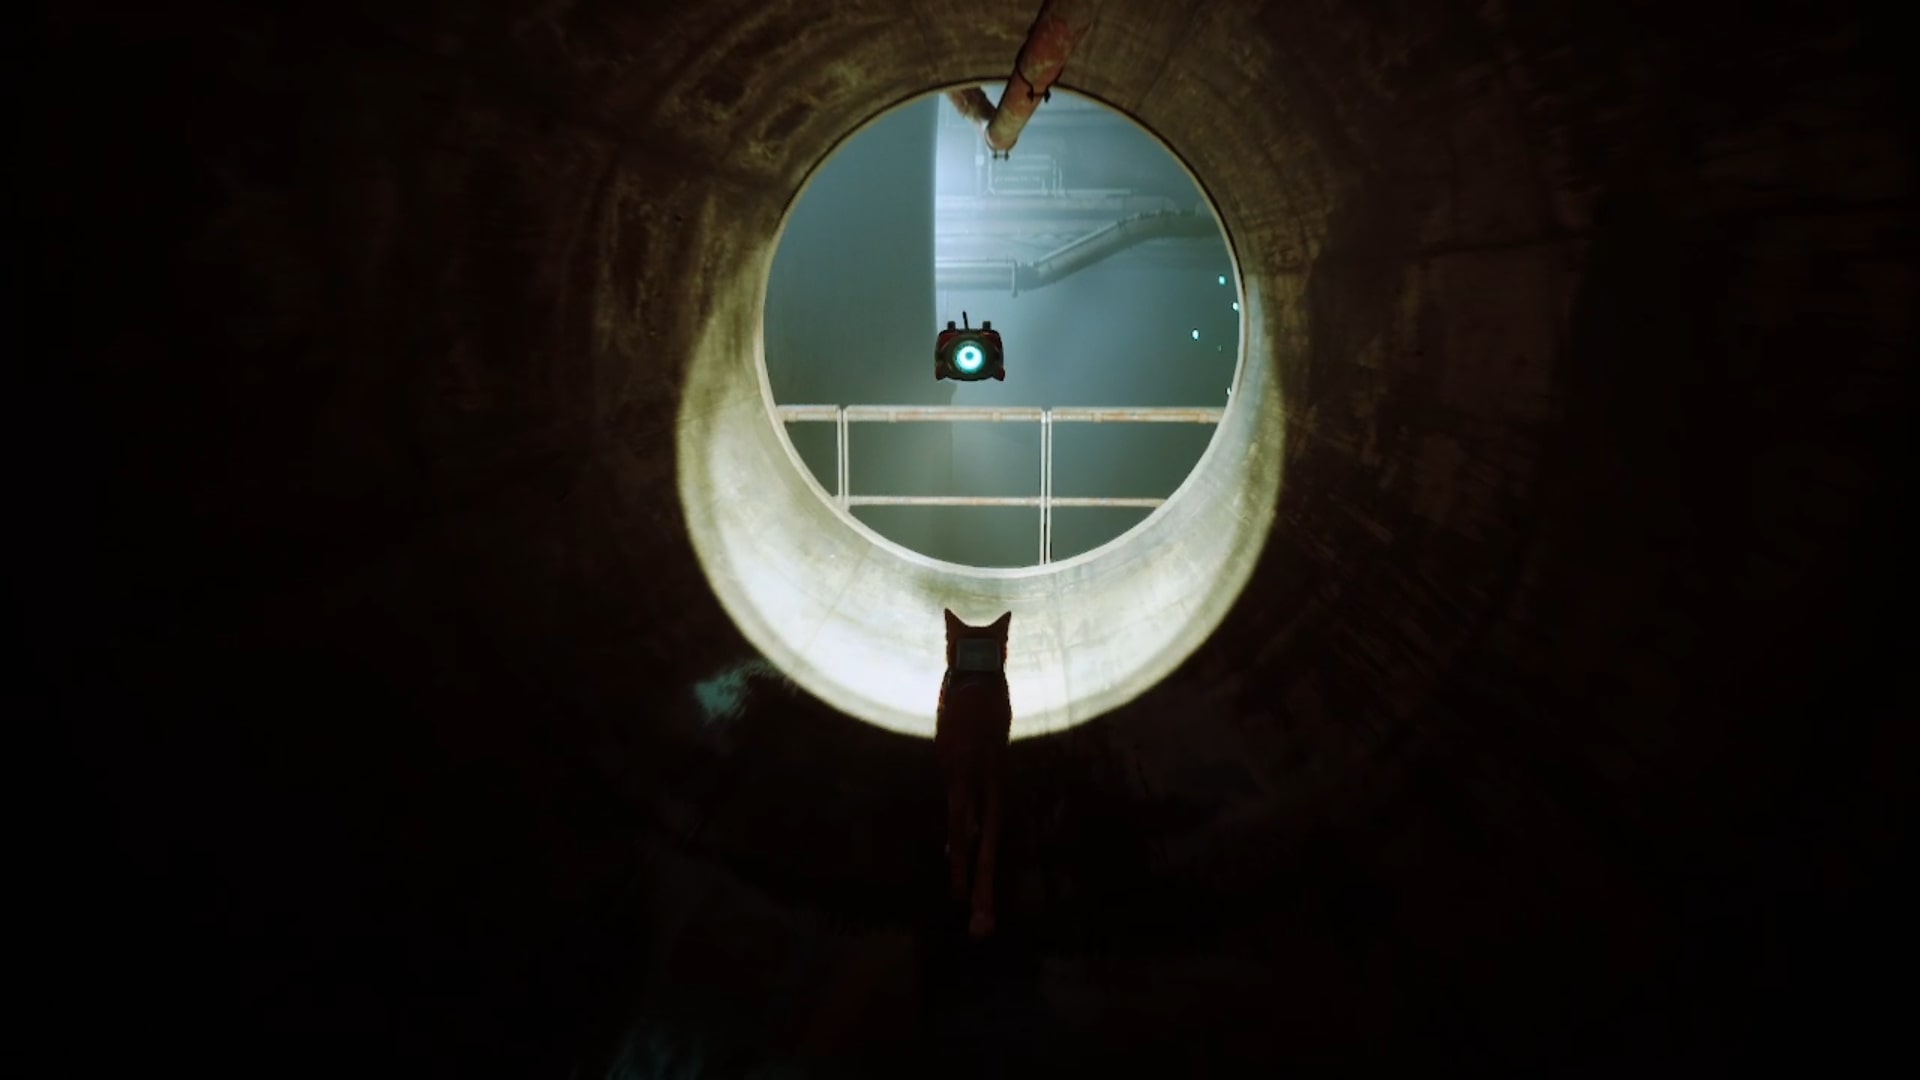 Stray memories guide: The eponymous stray and B-12 travel through a large concrete sewer pipe. At the end of the pipe is a safety railing that blocks off a huge, darkened room housing the Walled City’s sewage system